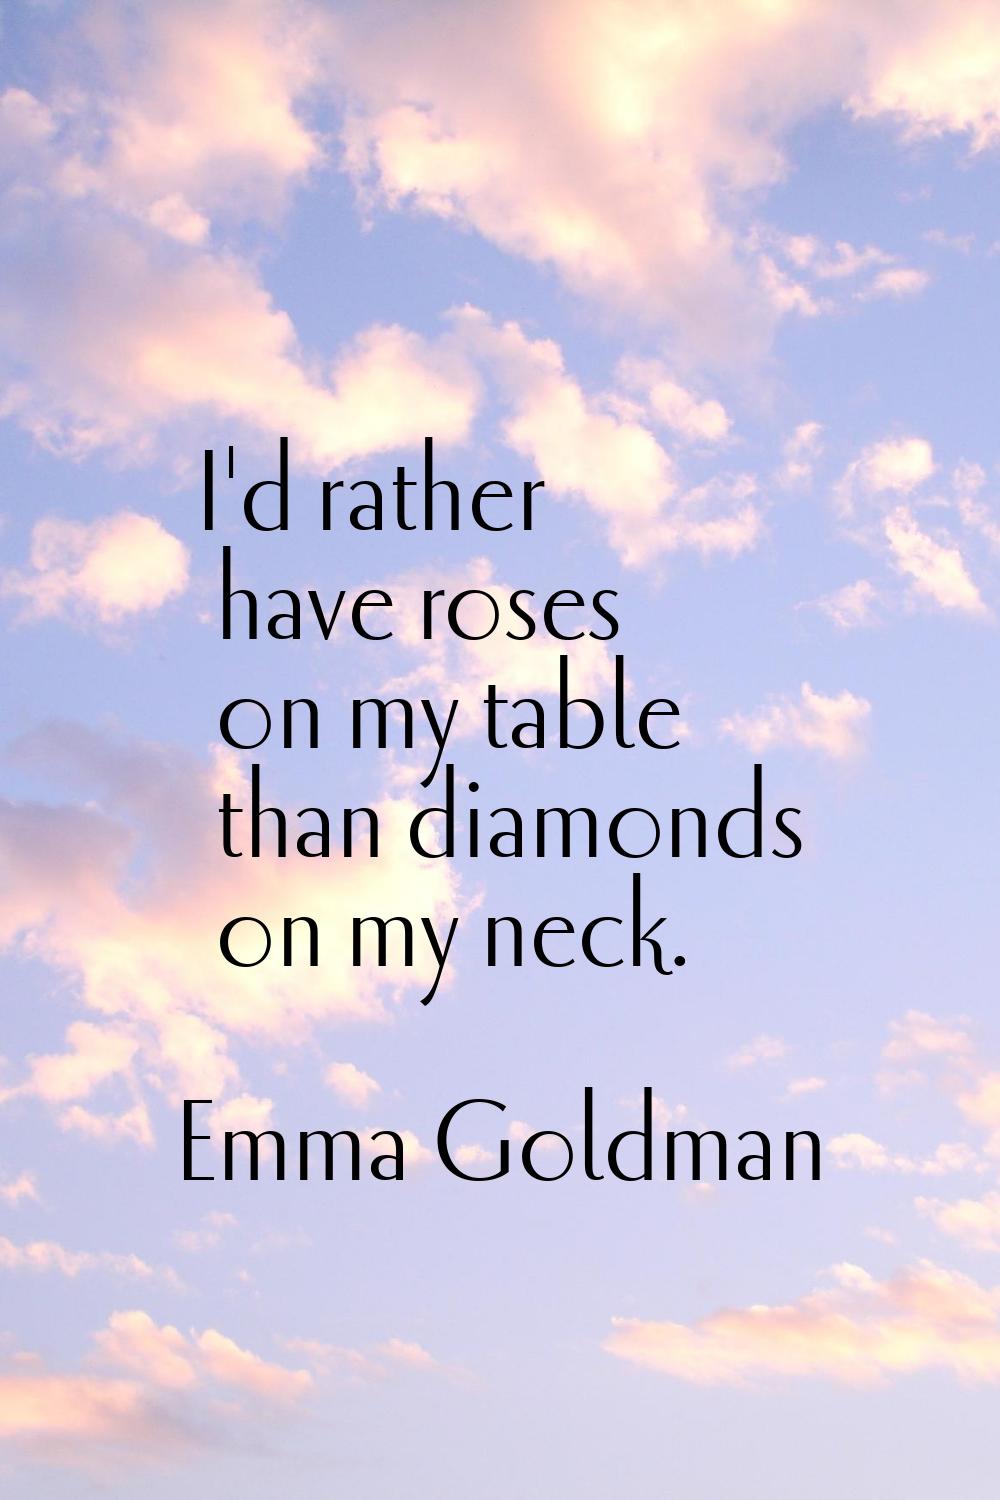 I'd rather have roses on my table than diamonds on my neck.